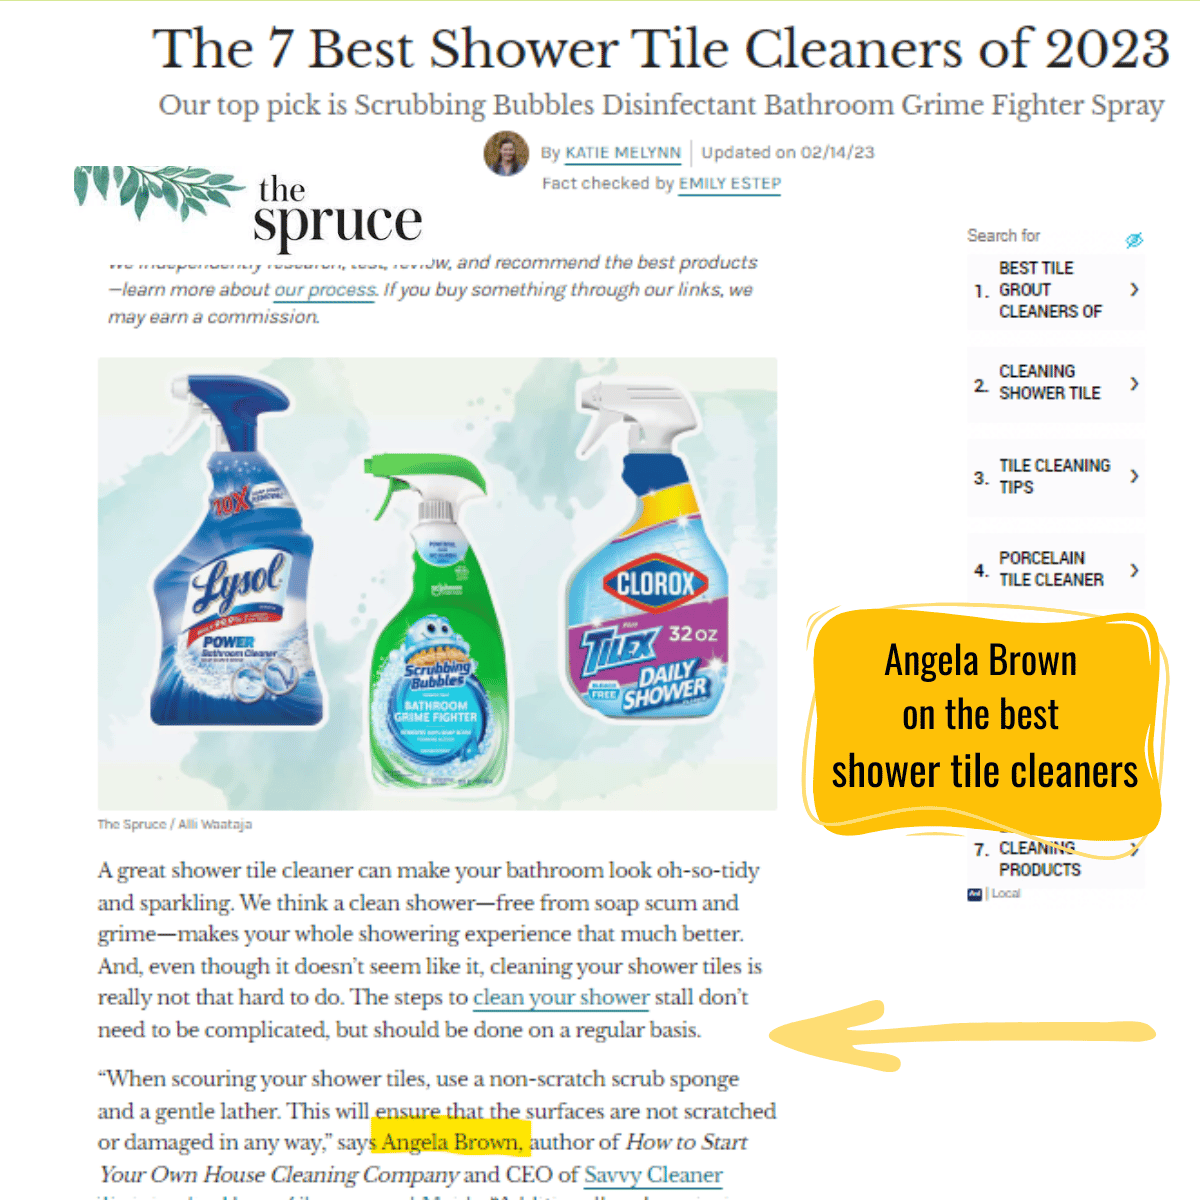 The-7-Best-Shower-Tile-Cleaners-PNG-Compressed.png